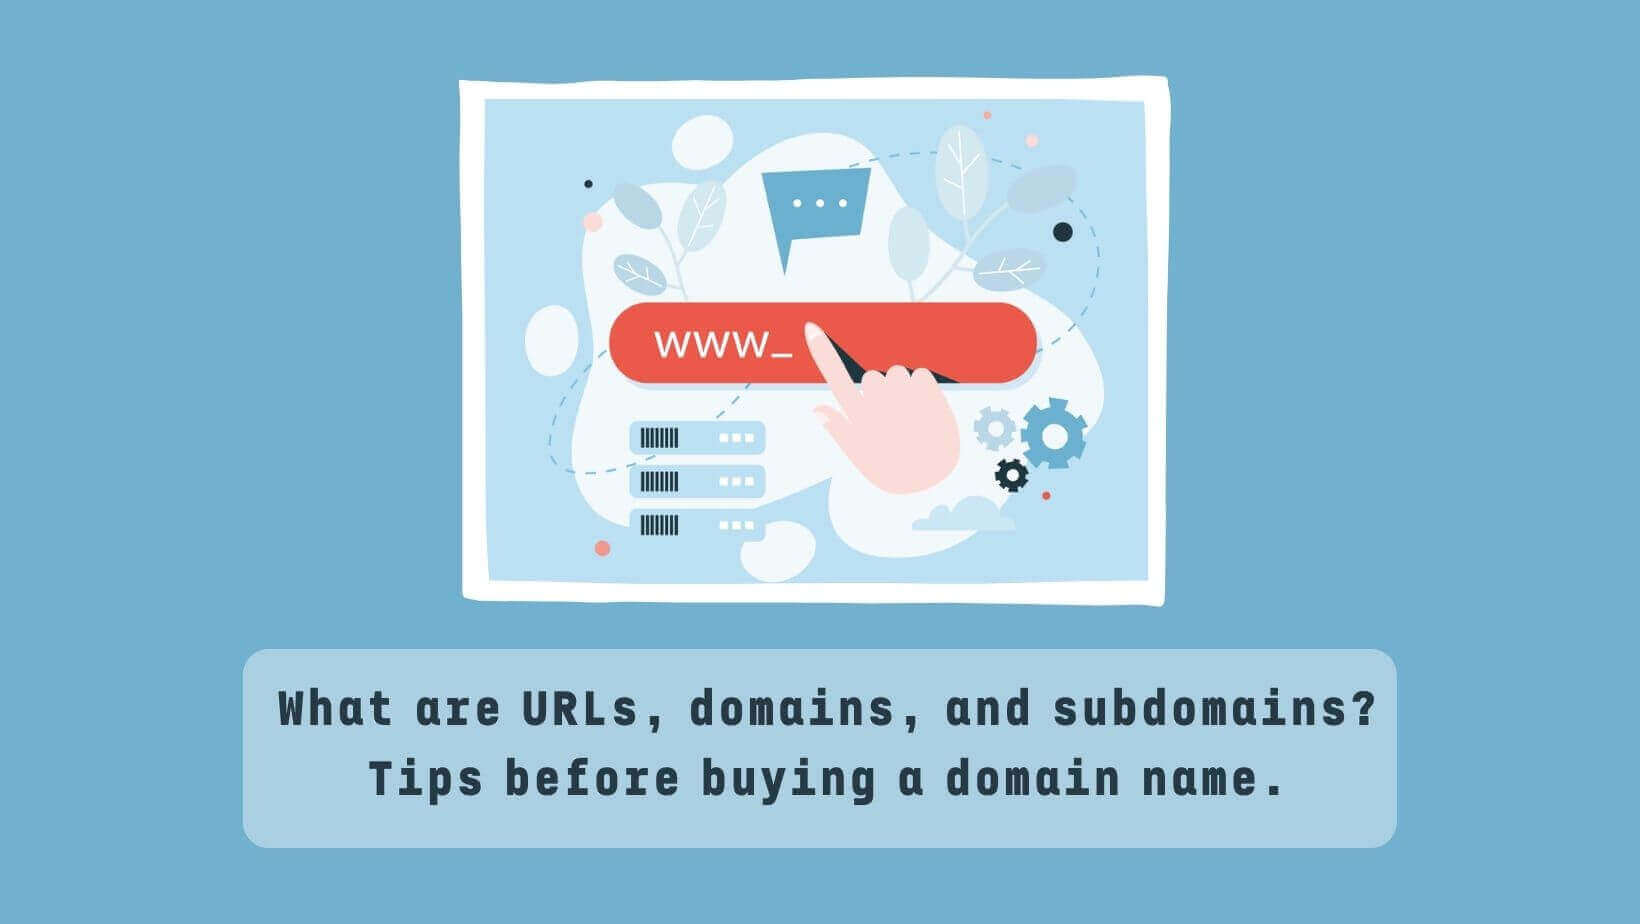 What are URLs, domains, and subdomains Tips before buying a domain name.